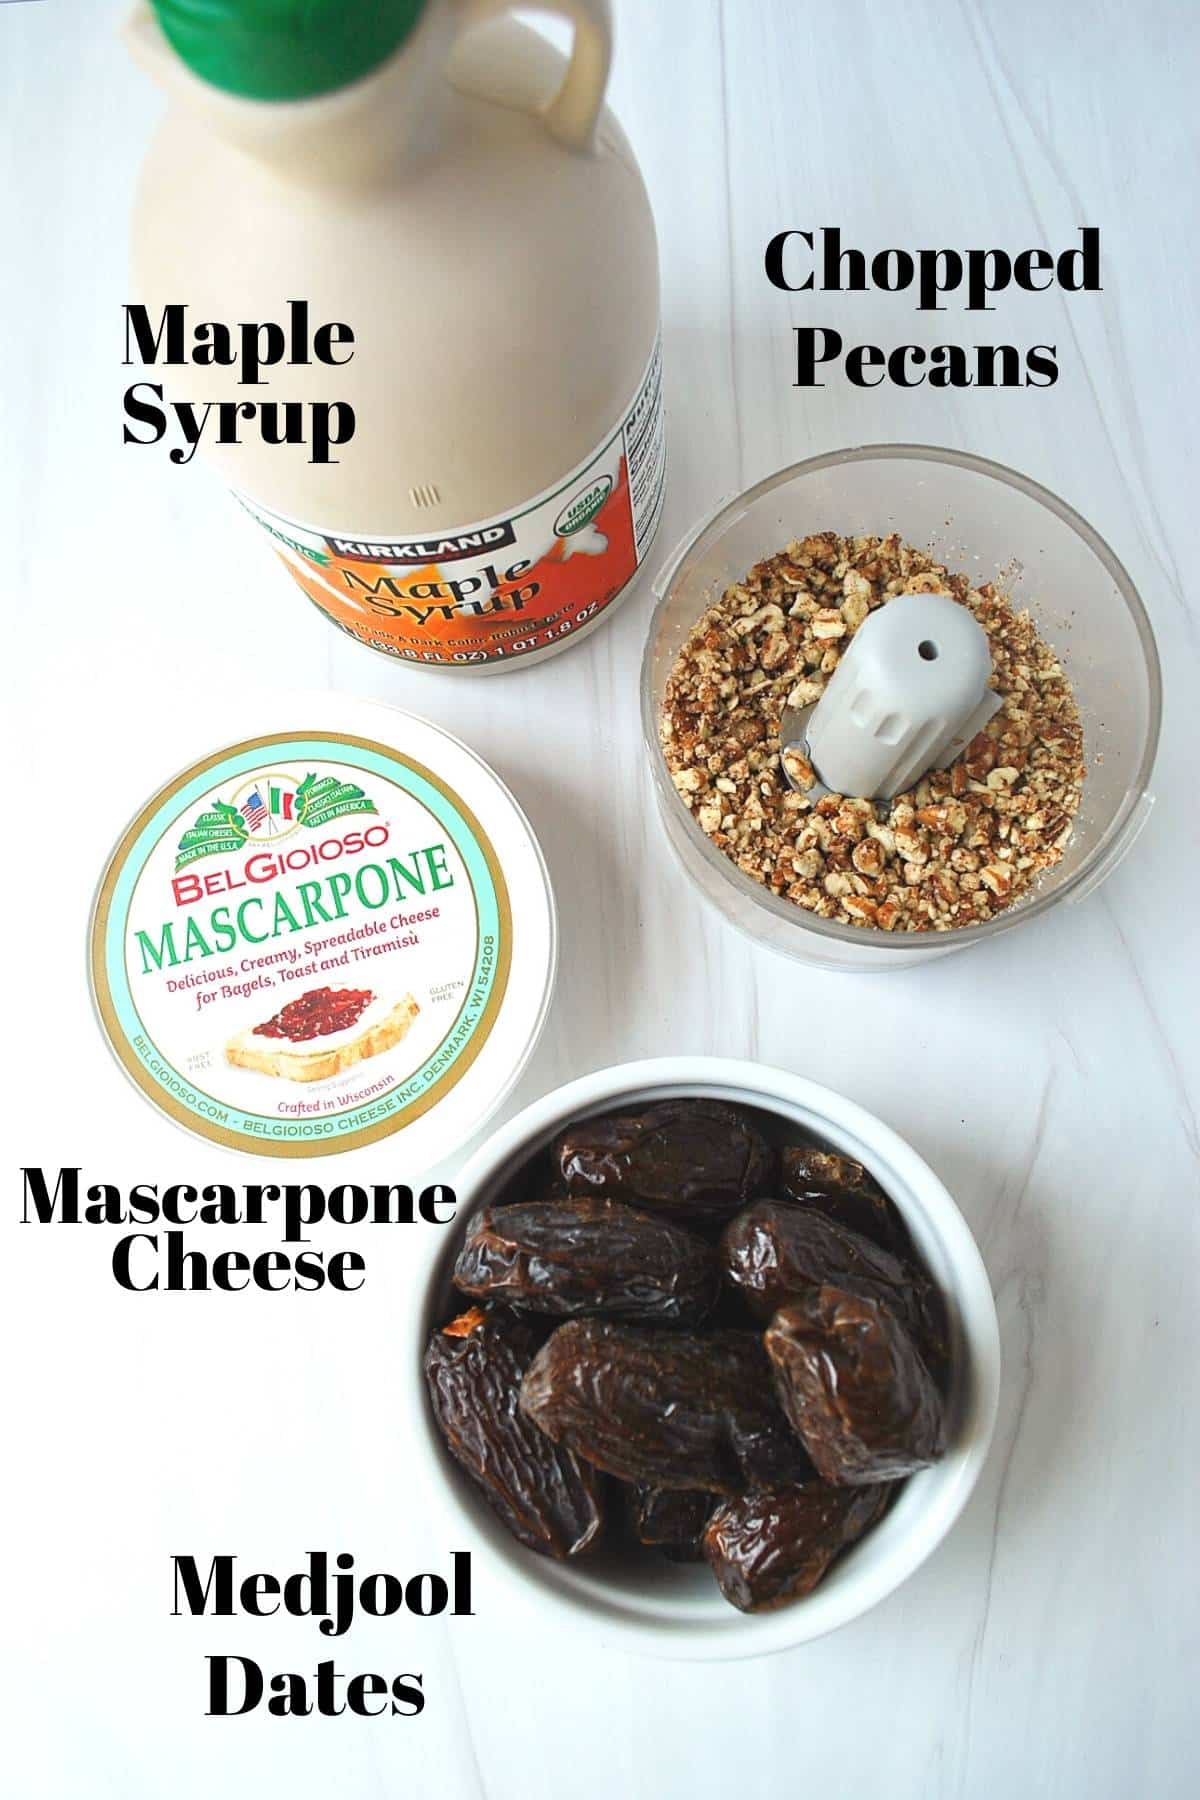 maple syrup, dates, mascarpone cheese and chopped pecans on a counter